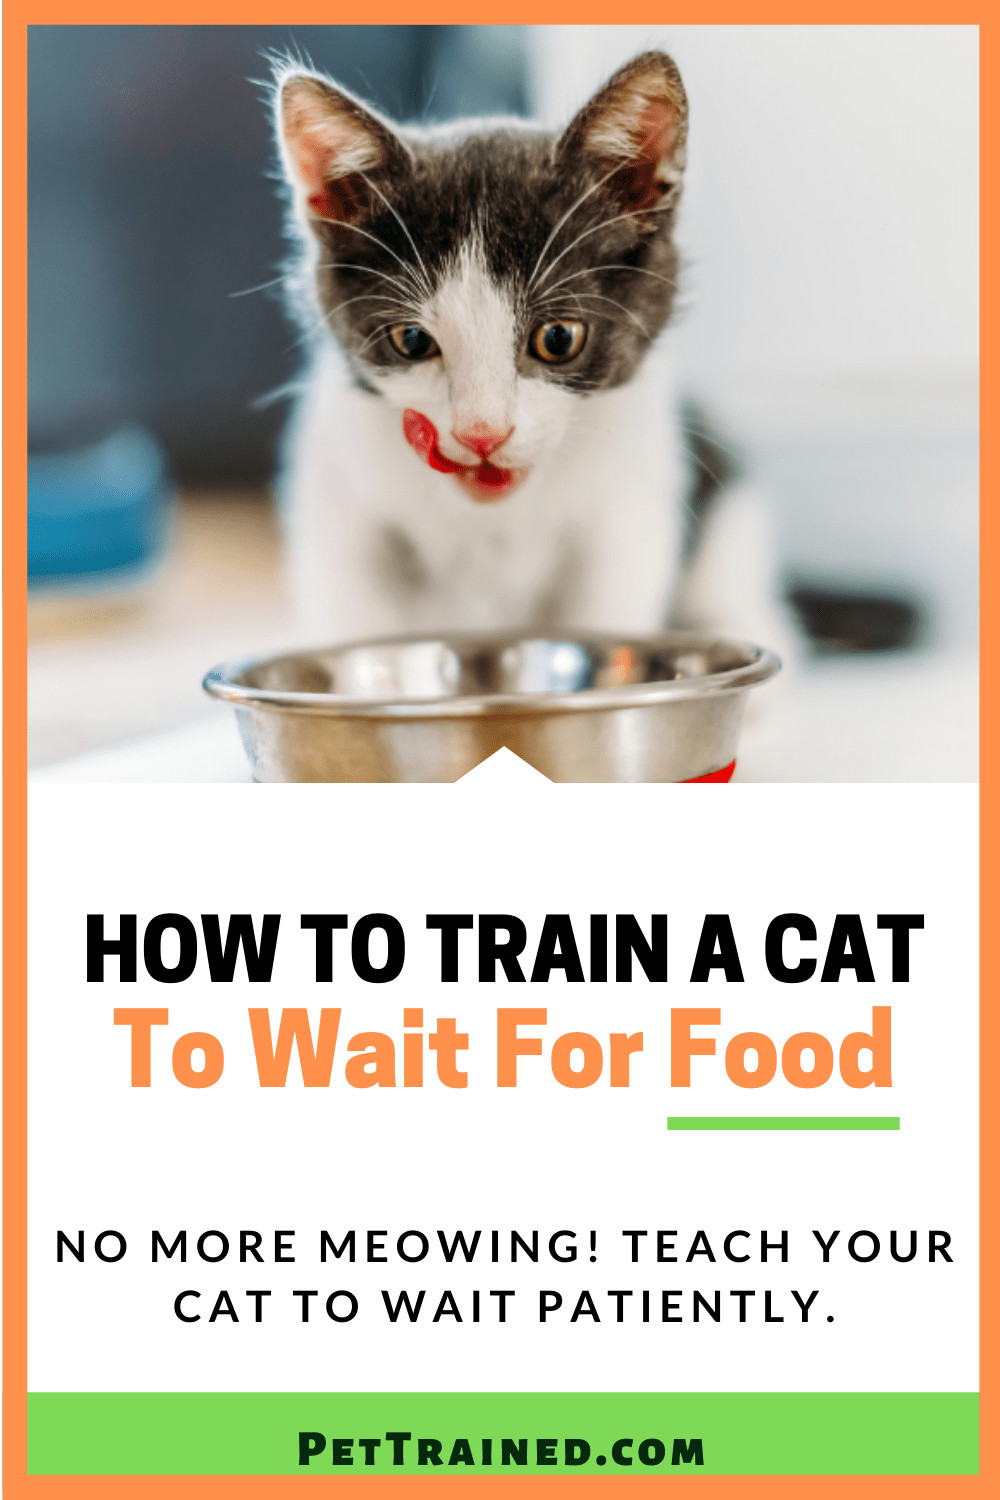 How to train a cat to wait for meals